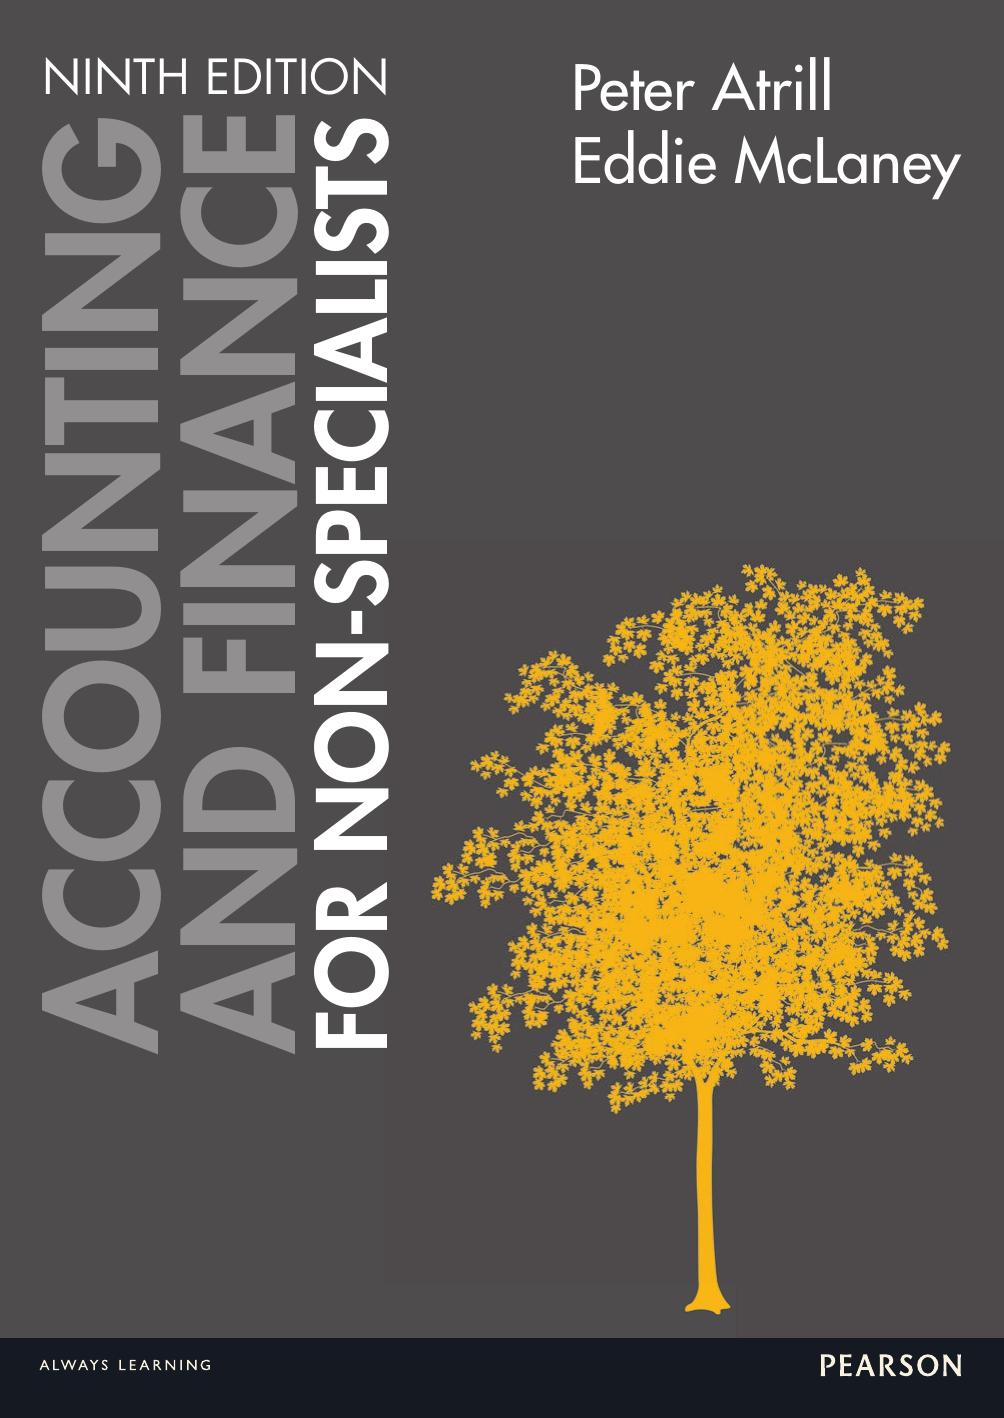 Accounting and Finance for Non-Specialists 9th Edition - Peter Atrill & Eddie McLaney.jpg